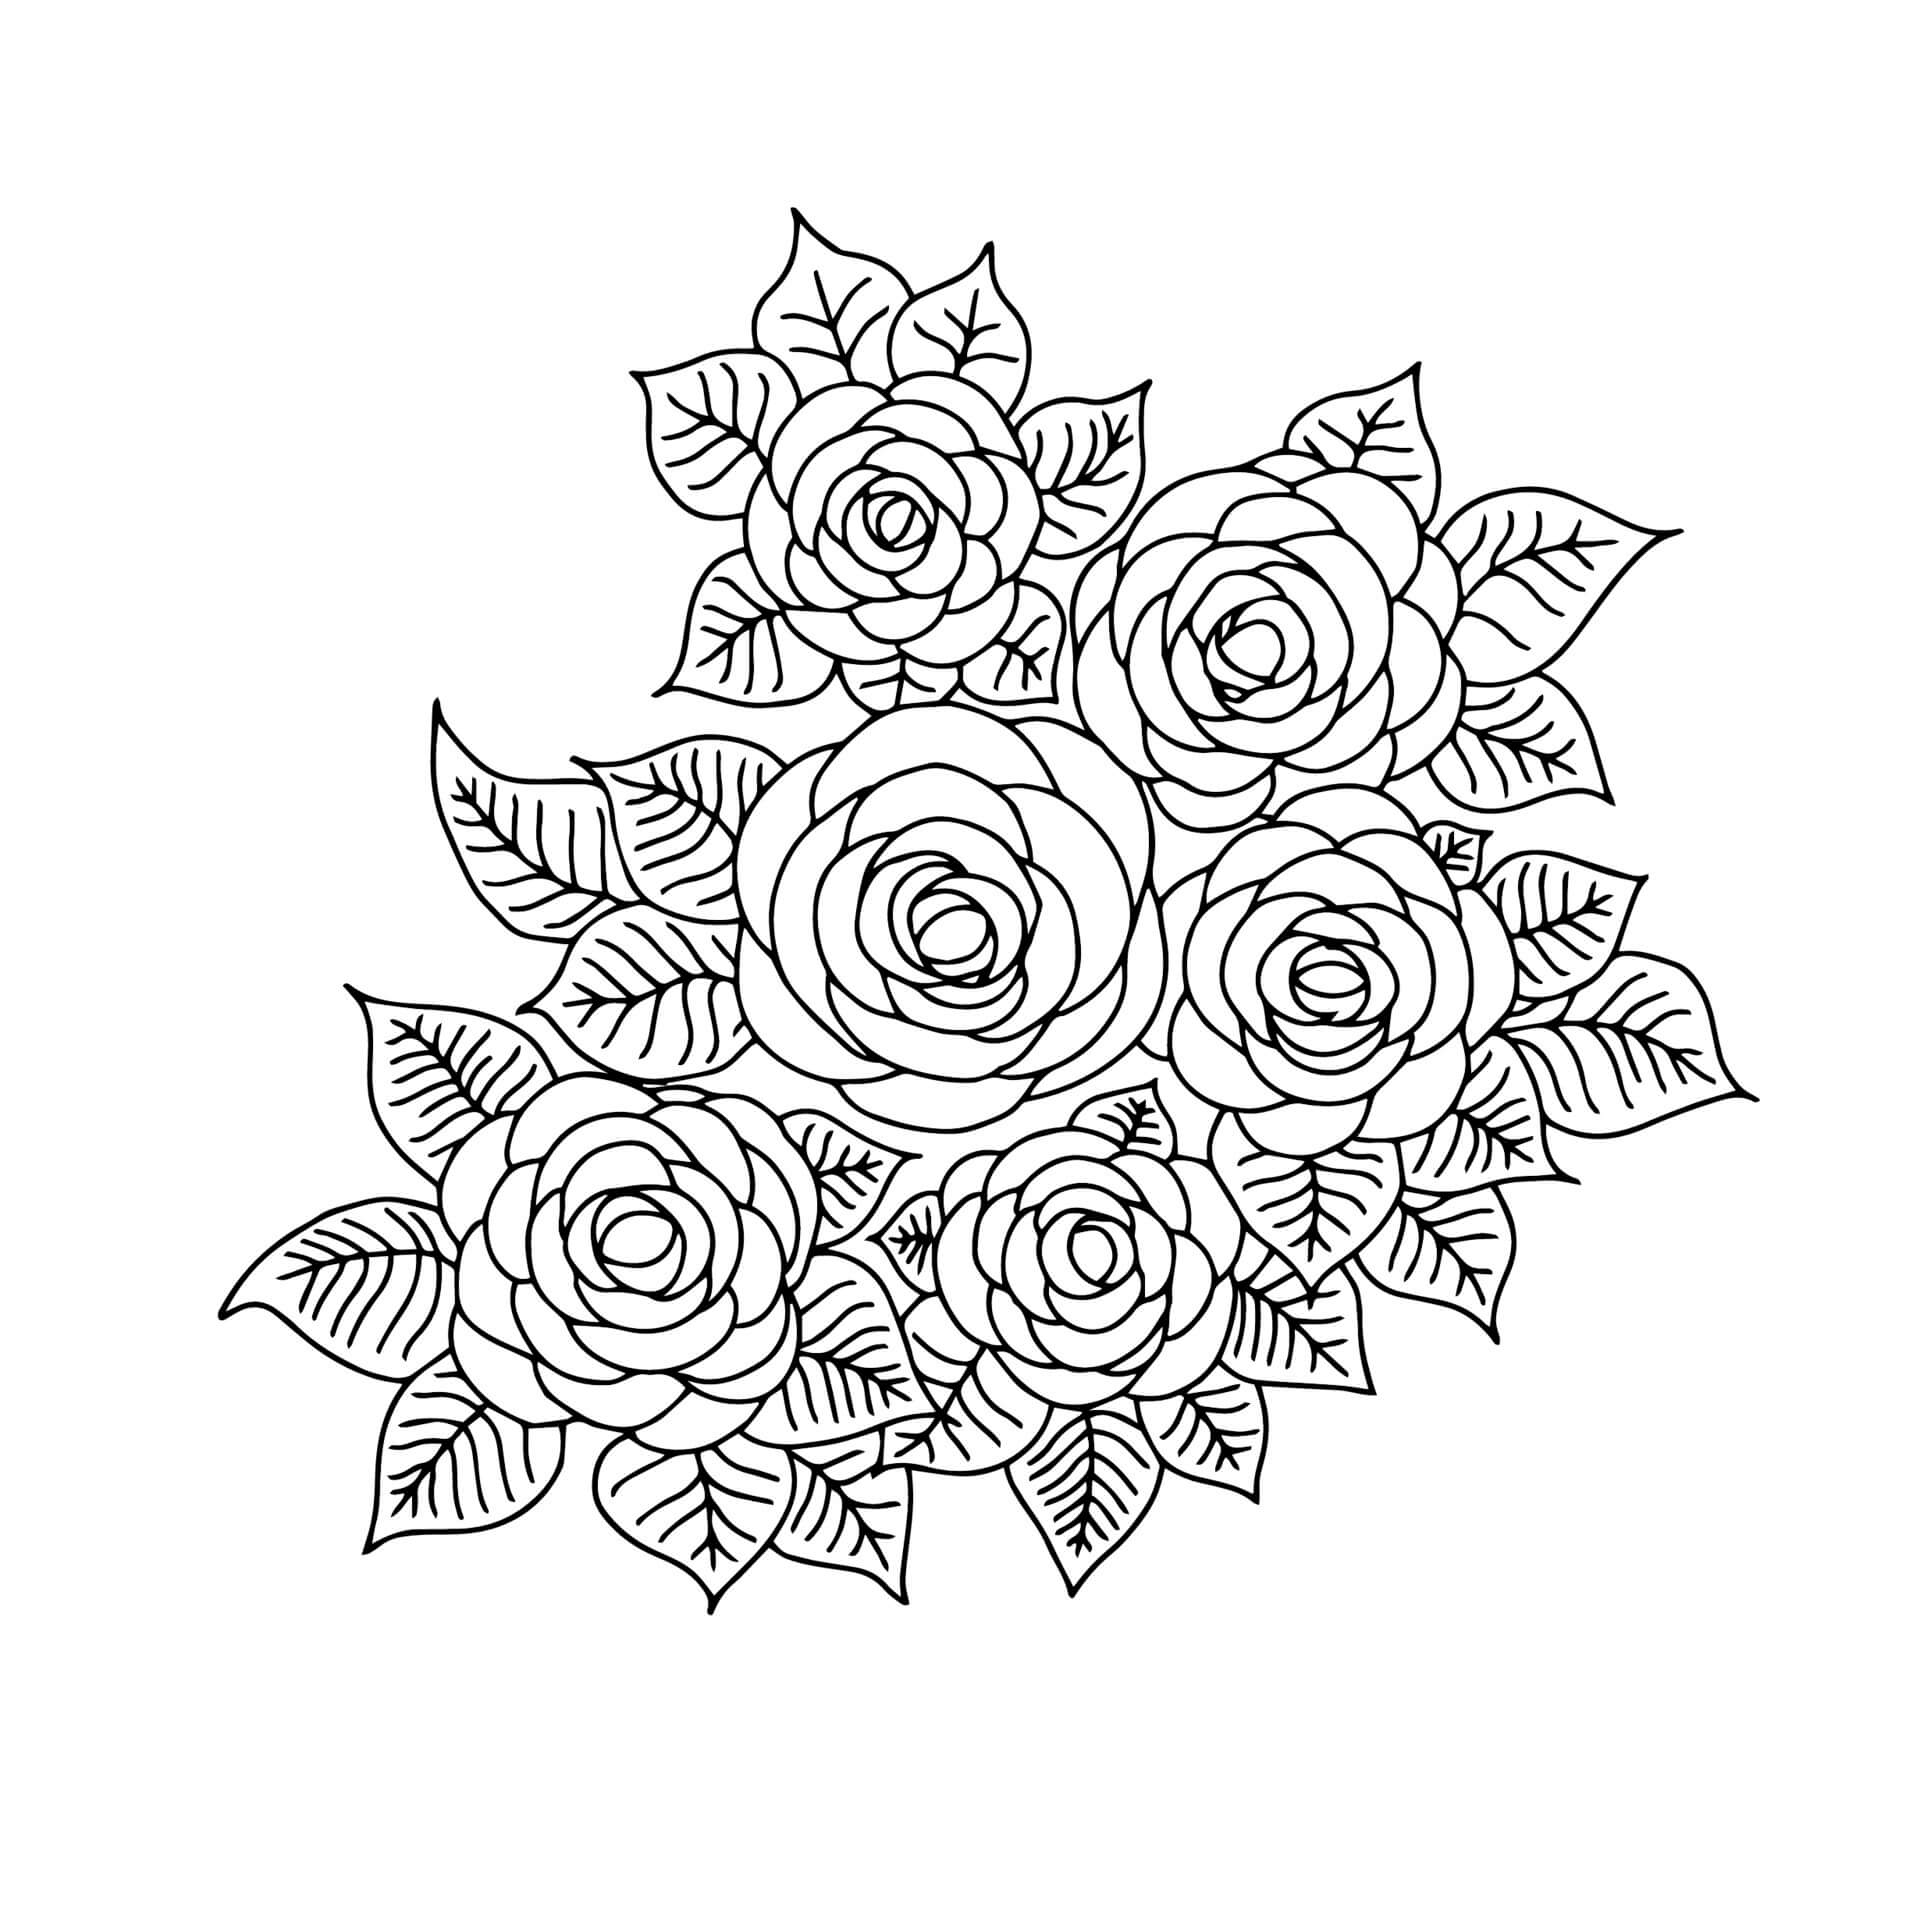 Belles Roses coloring page